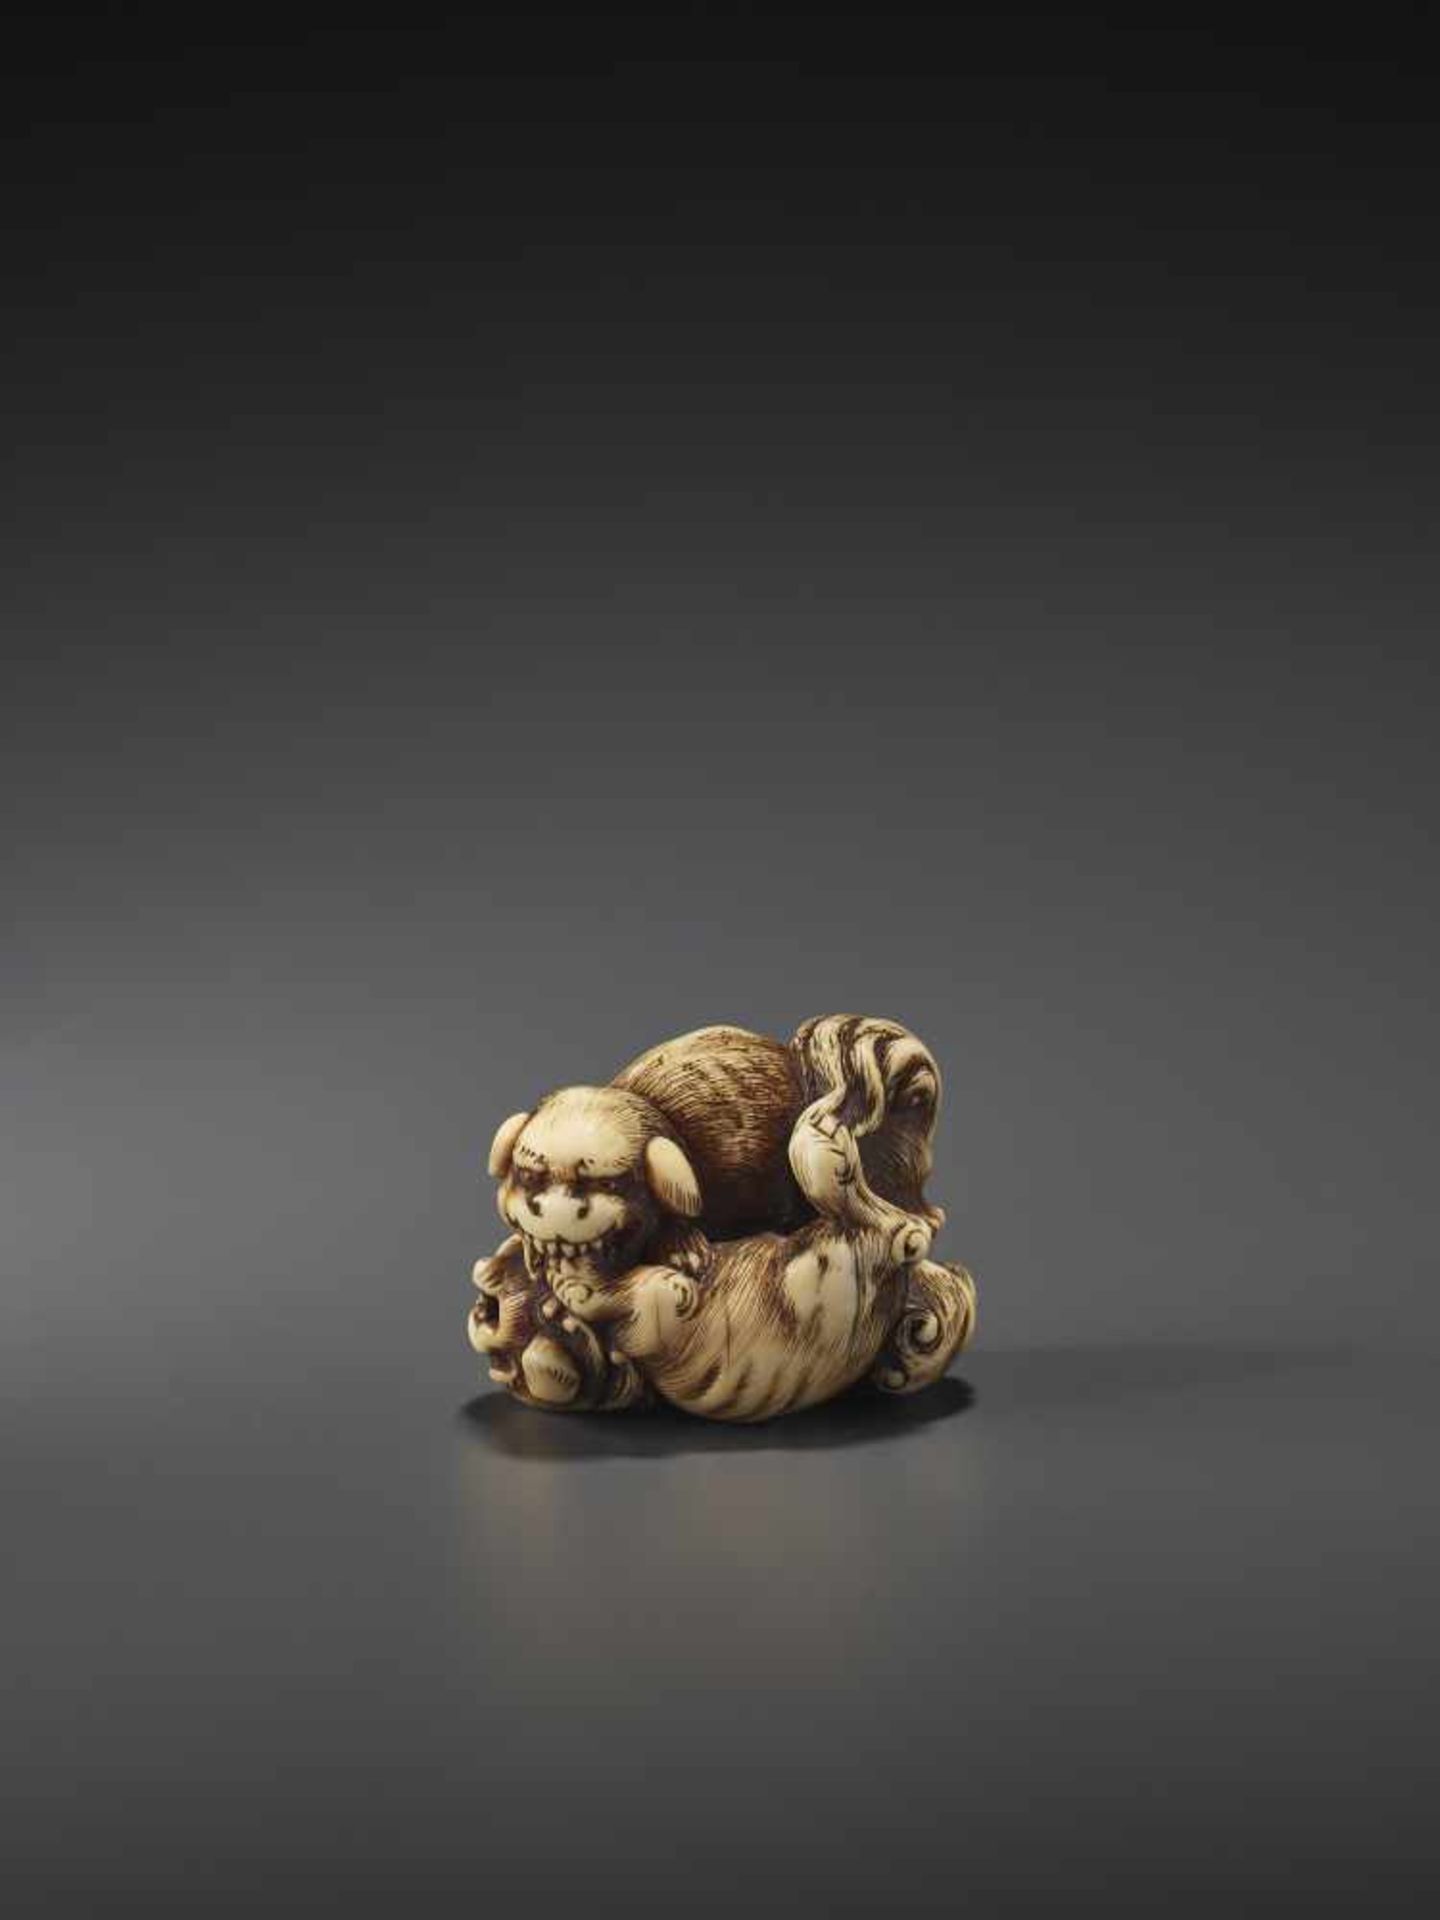 A FINE IVORY NETSUKE OF TWO FIGHTING SHISHI BY KINSHI By Kinshi, ivory netsukeJapan, 19th century, - Image 3 of 10